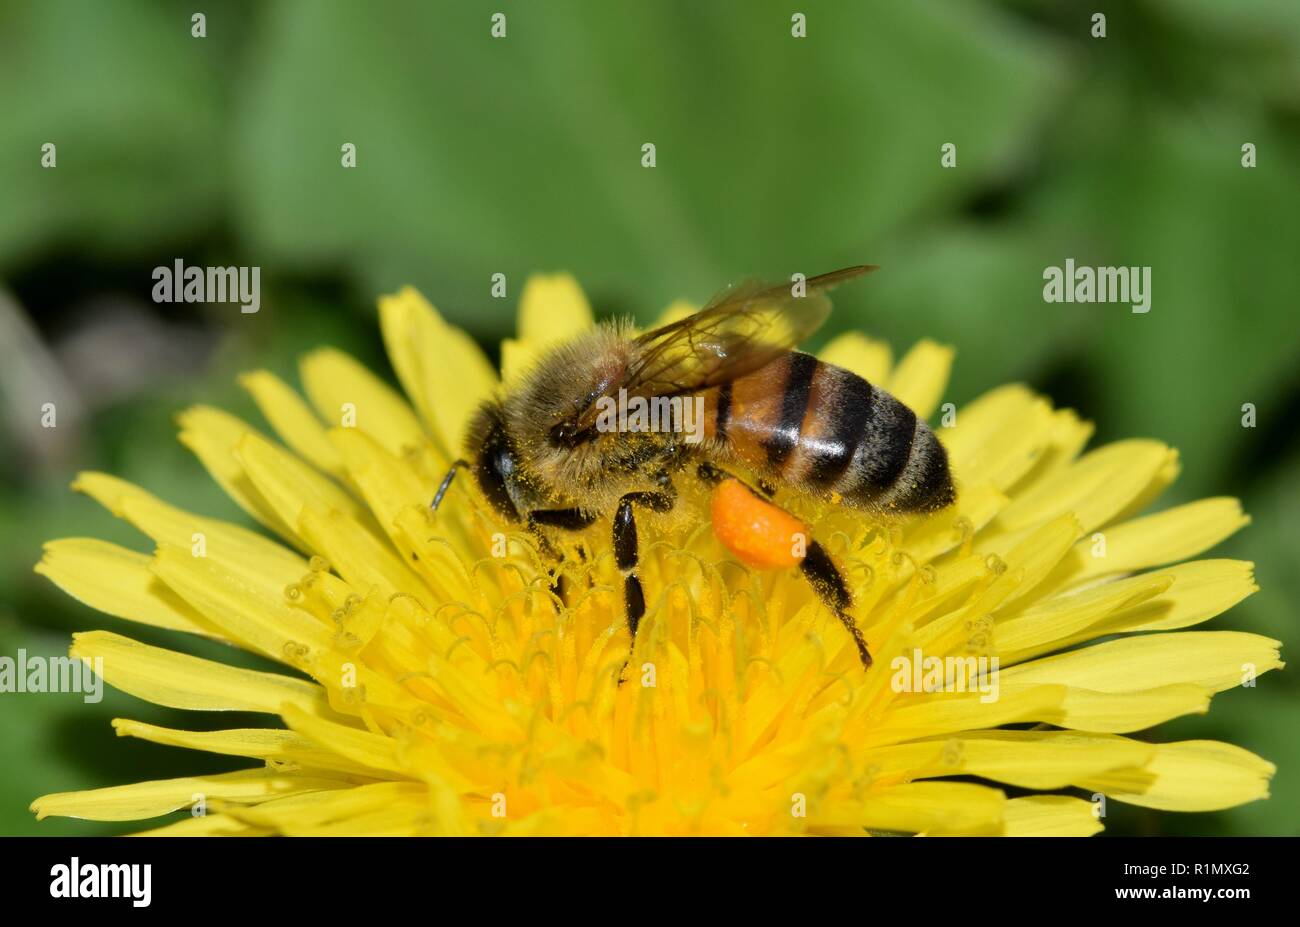 Side view of a honey bee collecting pollen from a yellow dandelion flower. This bee has large visible orange pollen sacs on its back legs. Stock Photo